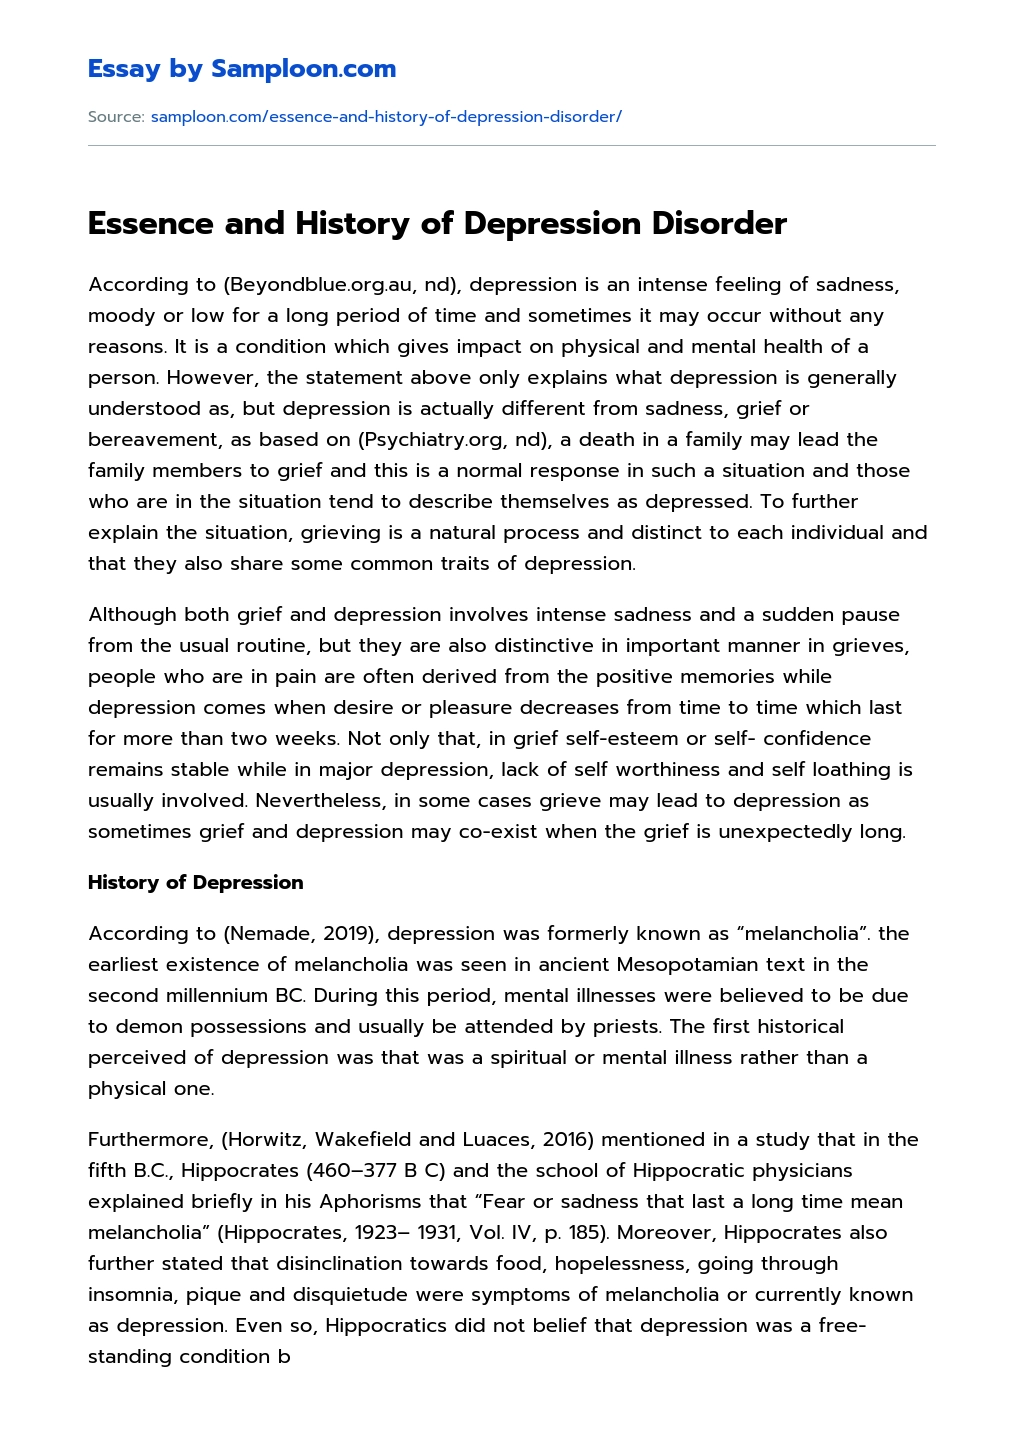 Essence and History of Depression Disorder essay